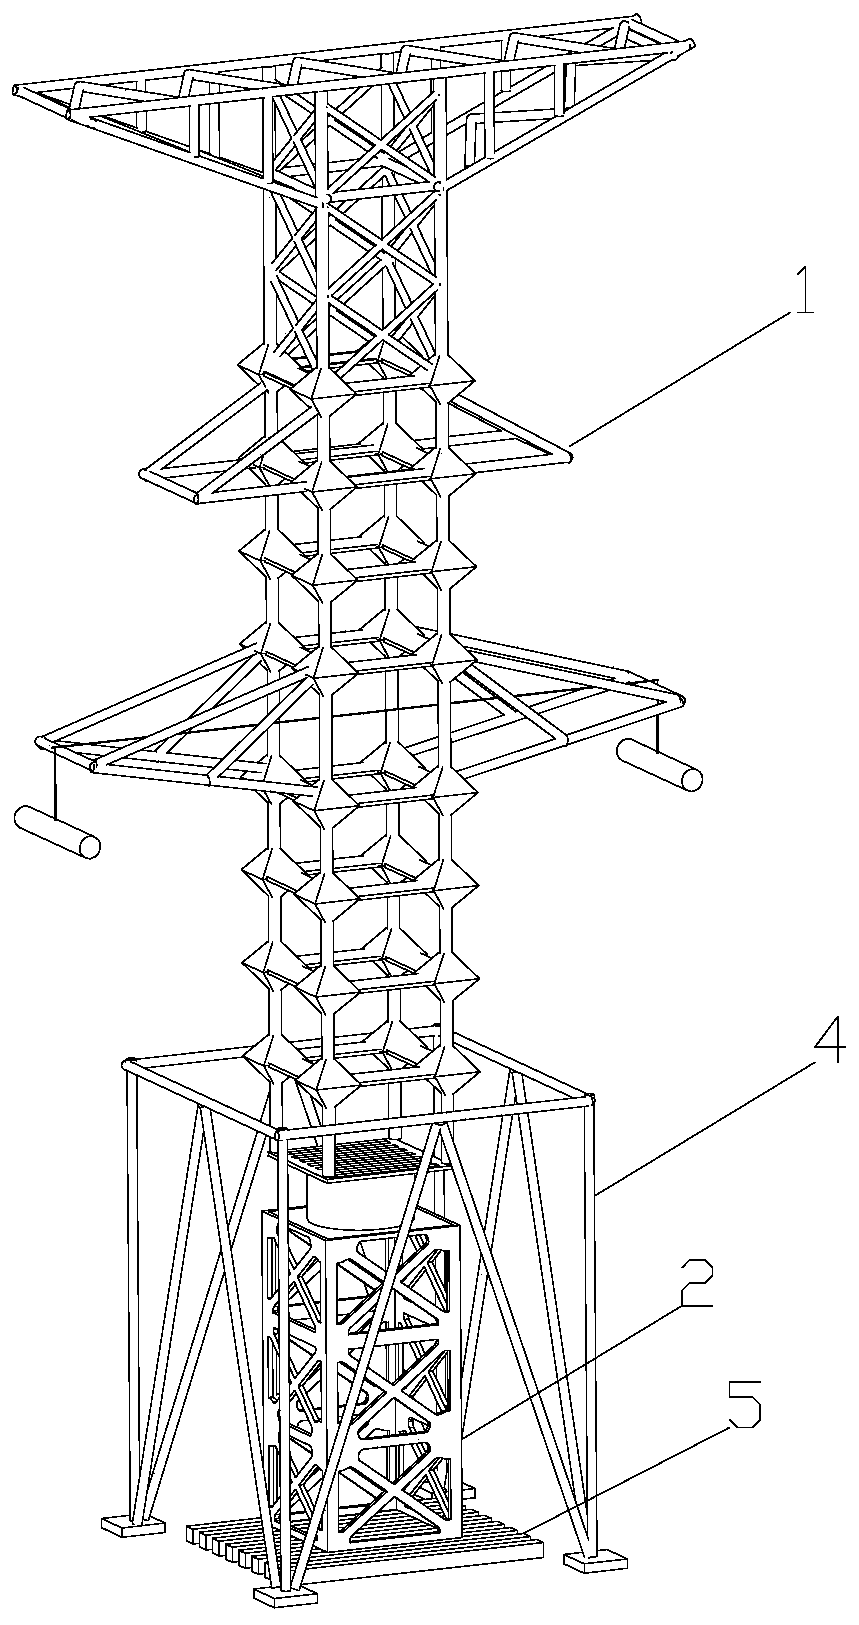 Self-lifting tower erecting device and method based on semi-rigid composite material tower head crane